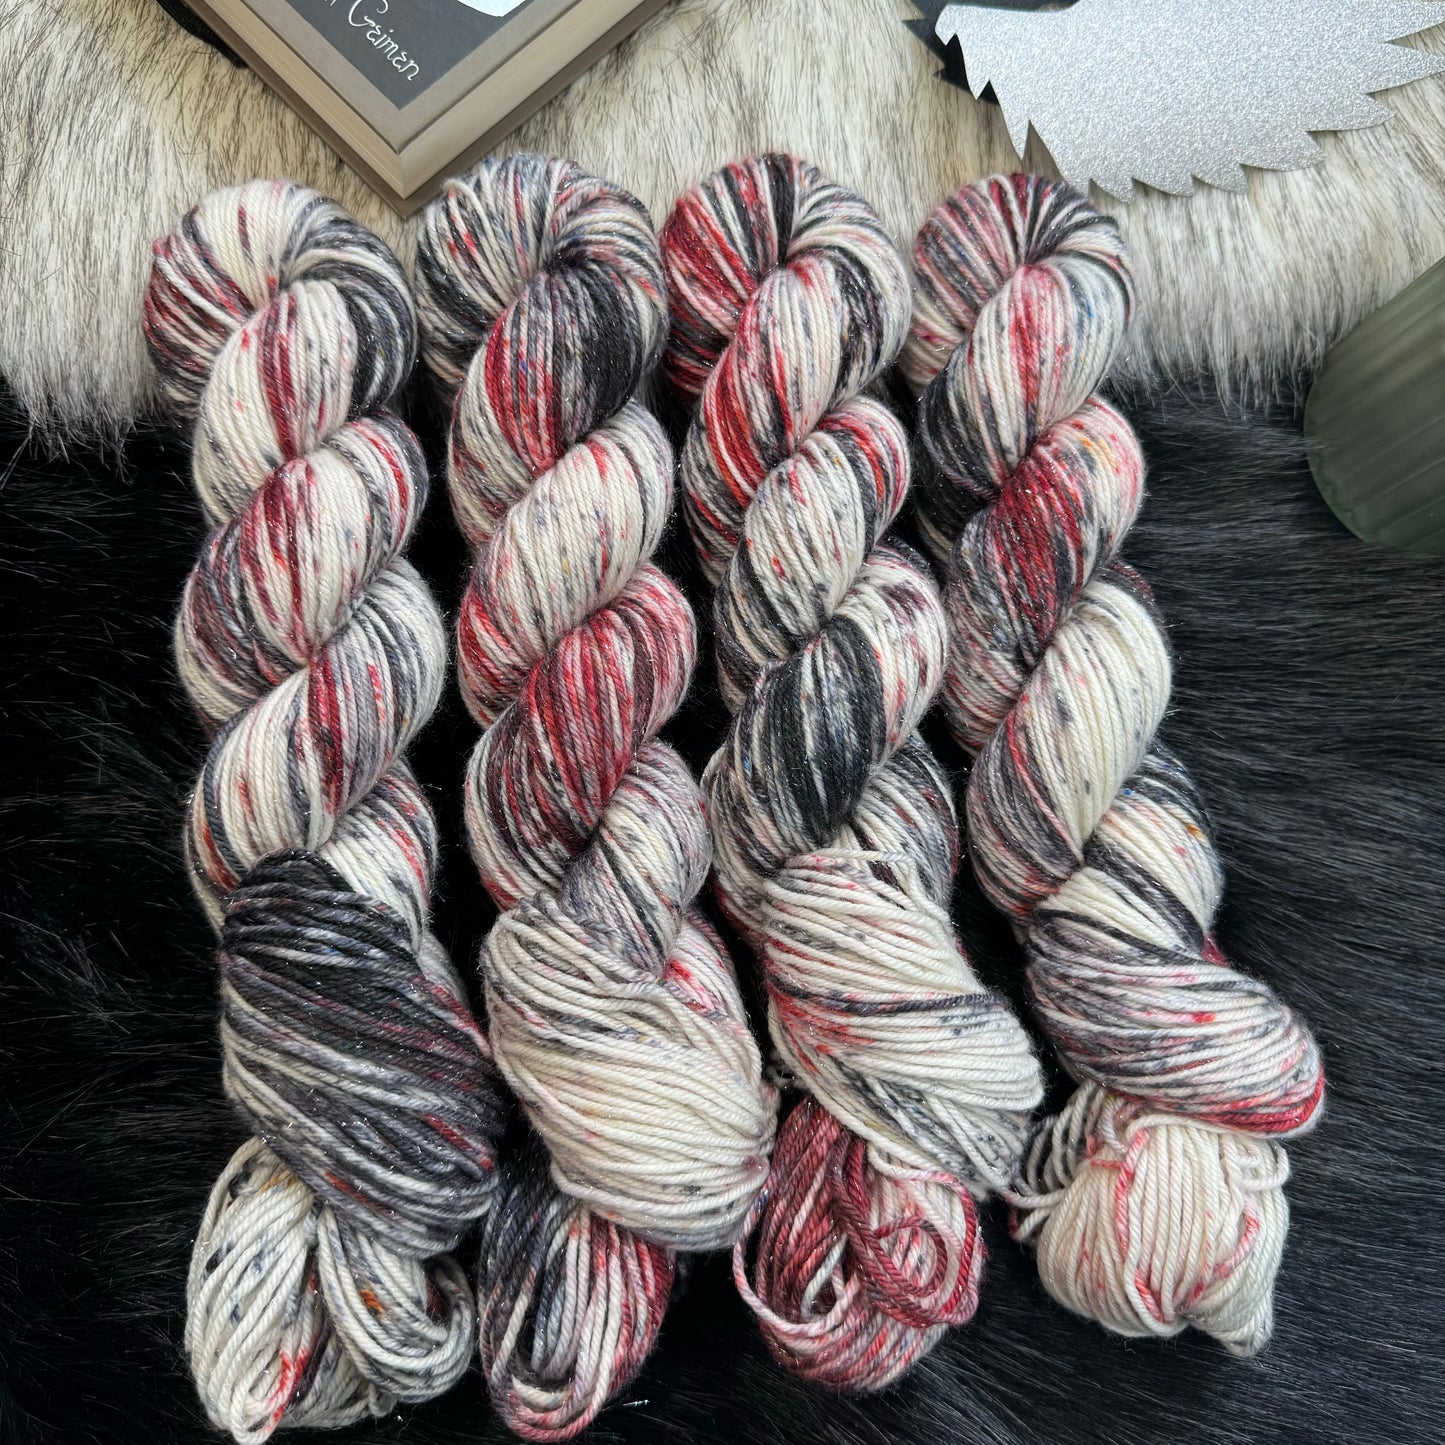 Four Bikers of the Apocalypse - Good Omens Collection - Hand Dyed Yarn - Dyed to Order (6 weeks) - NEW